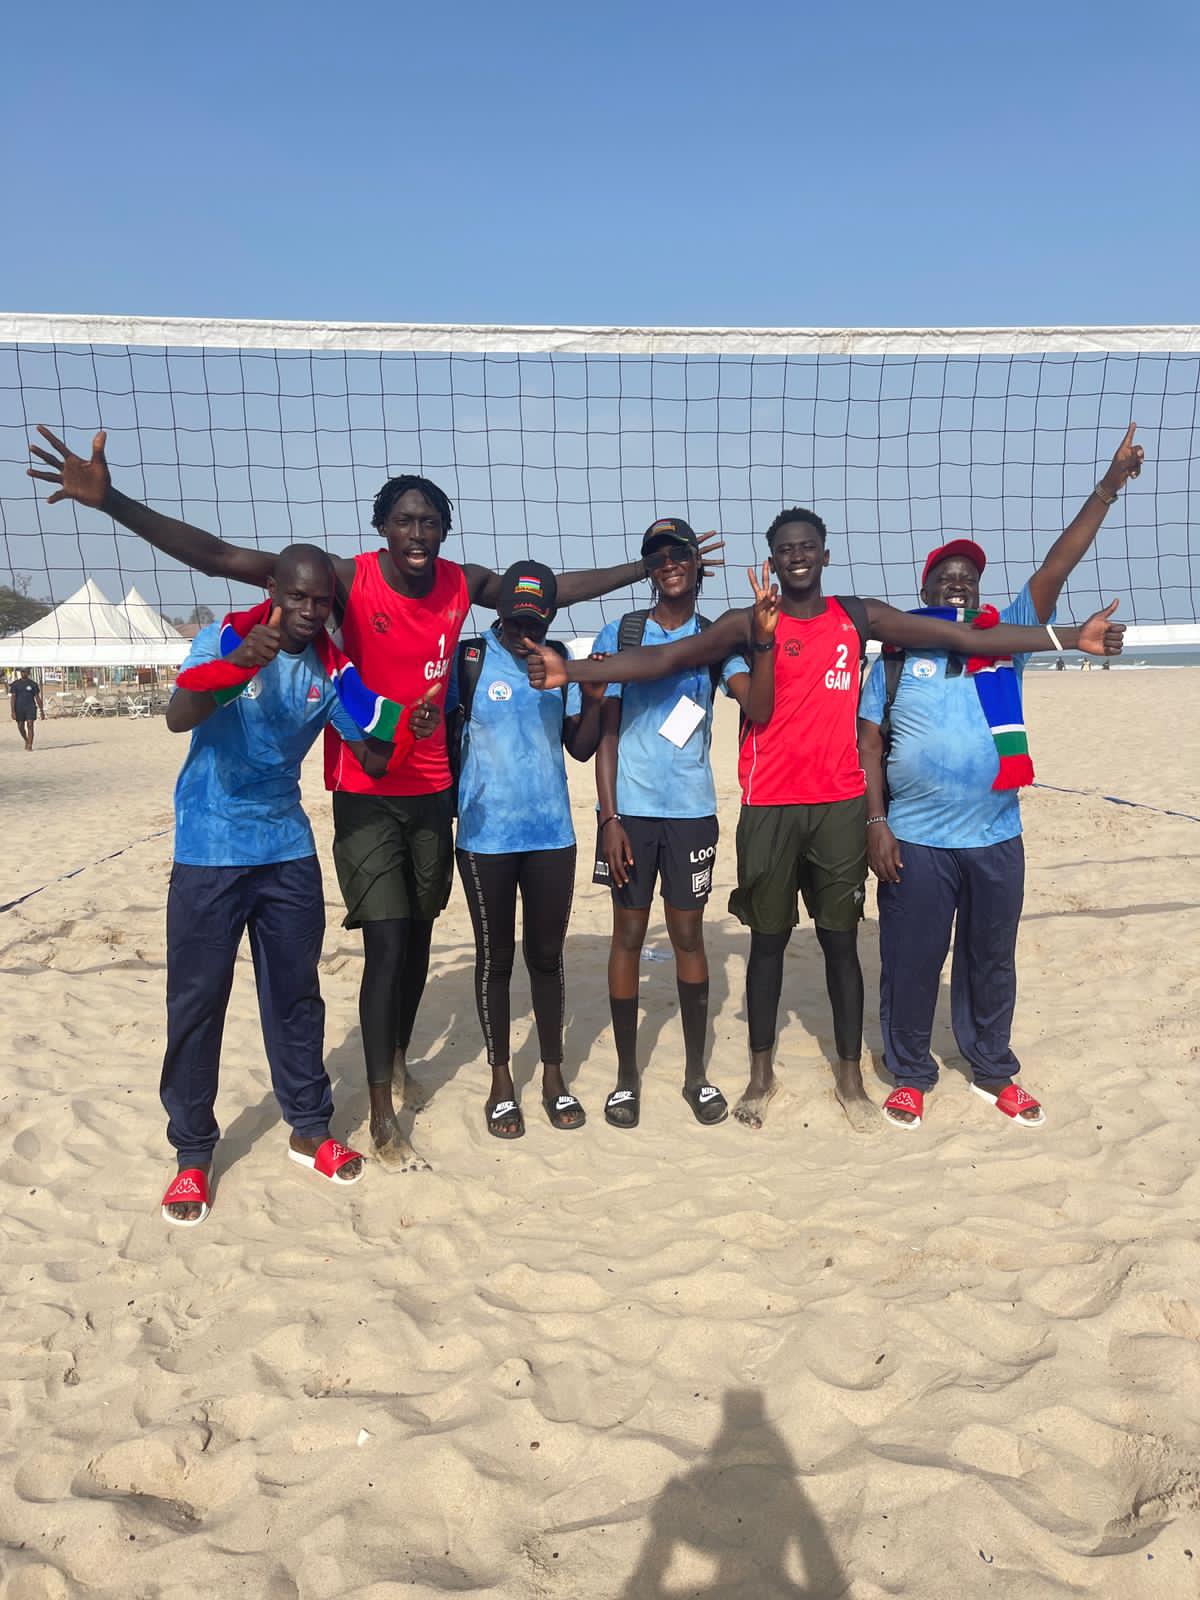 GAMBIA DEFEAT SOUTH AFRICA TO WIN BEACH VOLLEYBALL COMMONWEALTH GAMES QUALIFIERS